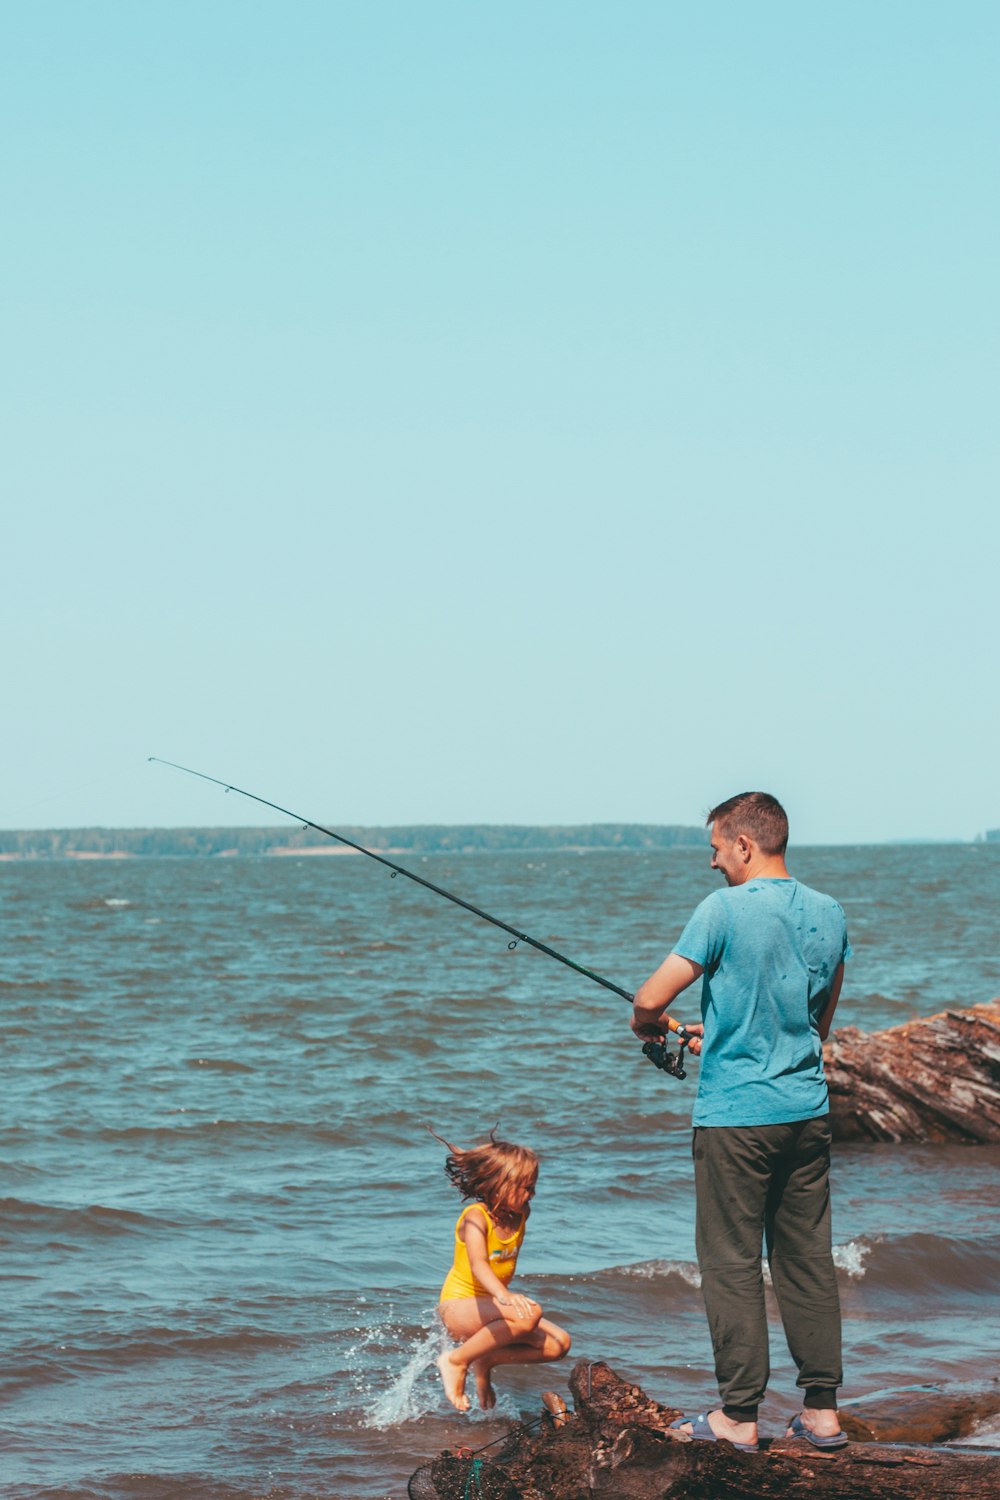 a man and a child fishing in the ocean